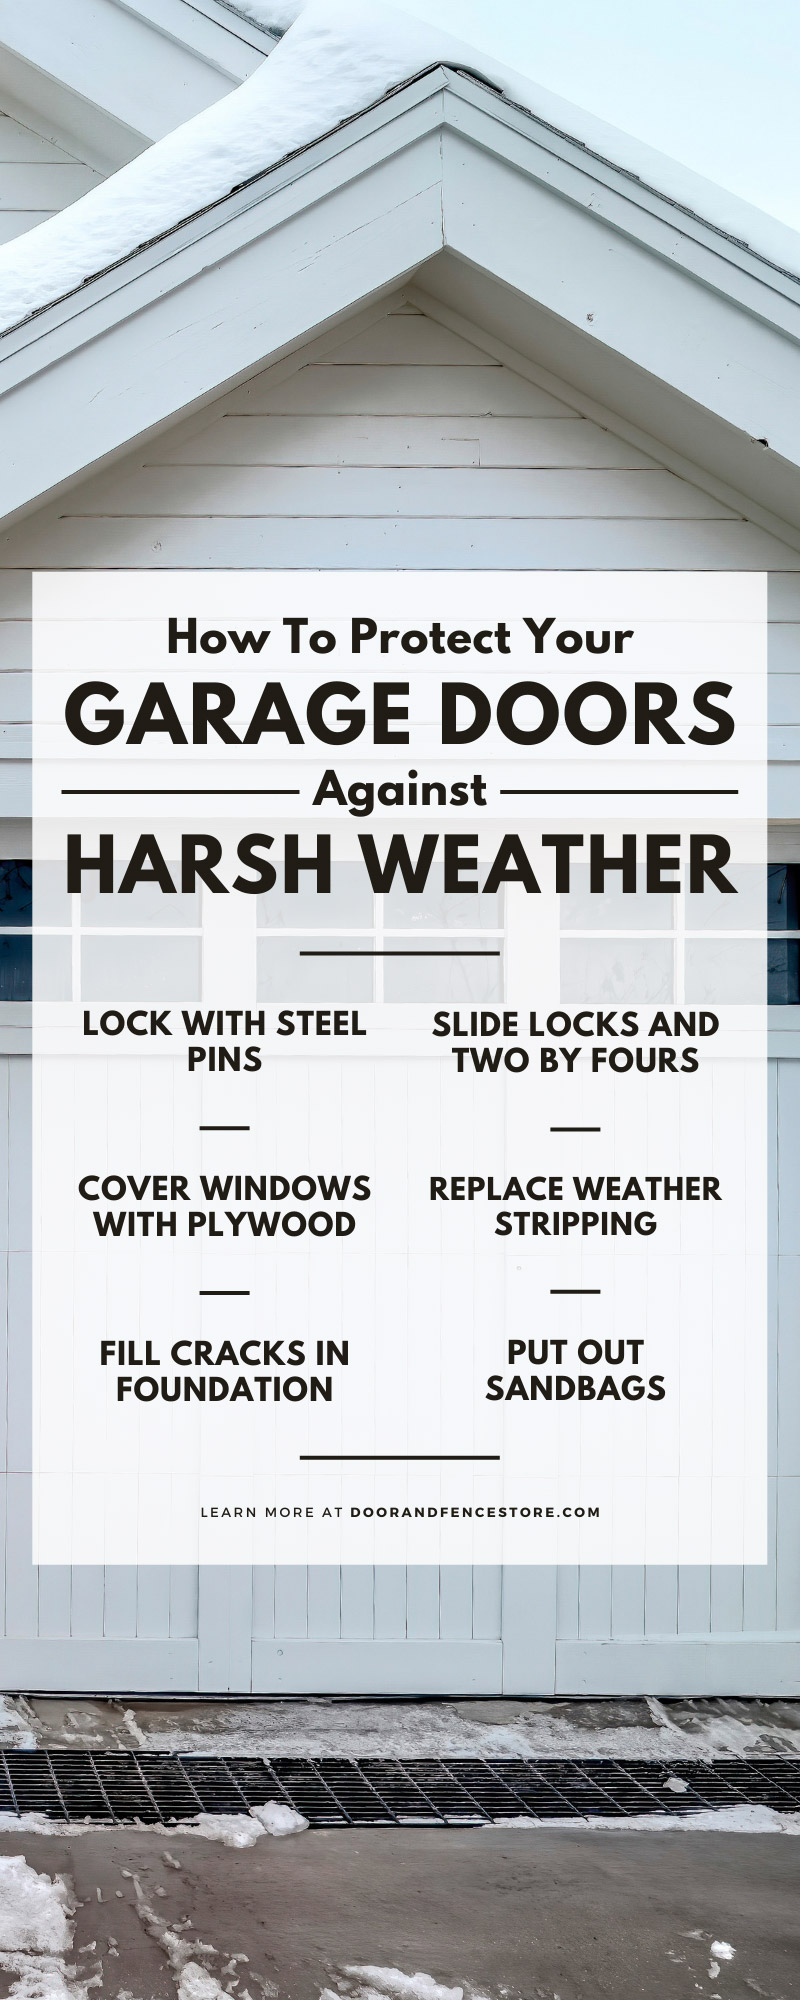 How To Protect Your Garage Doors Against Harsh Weather